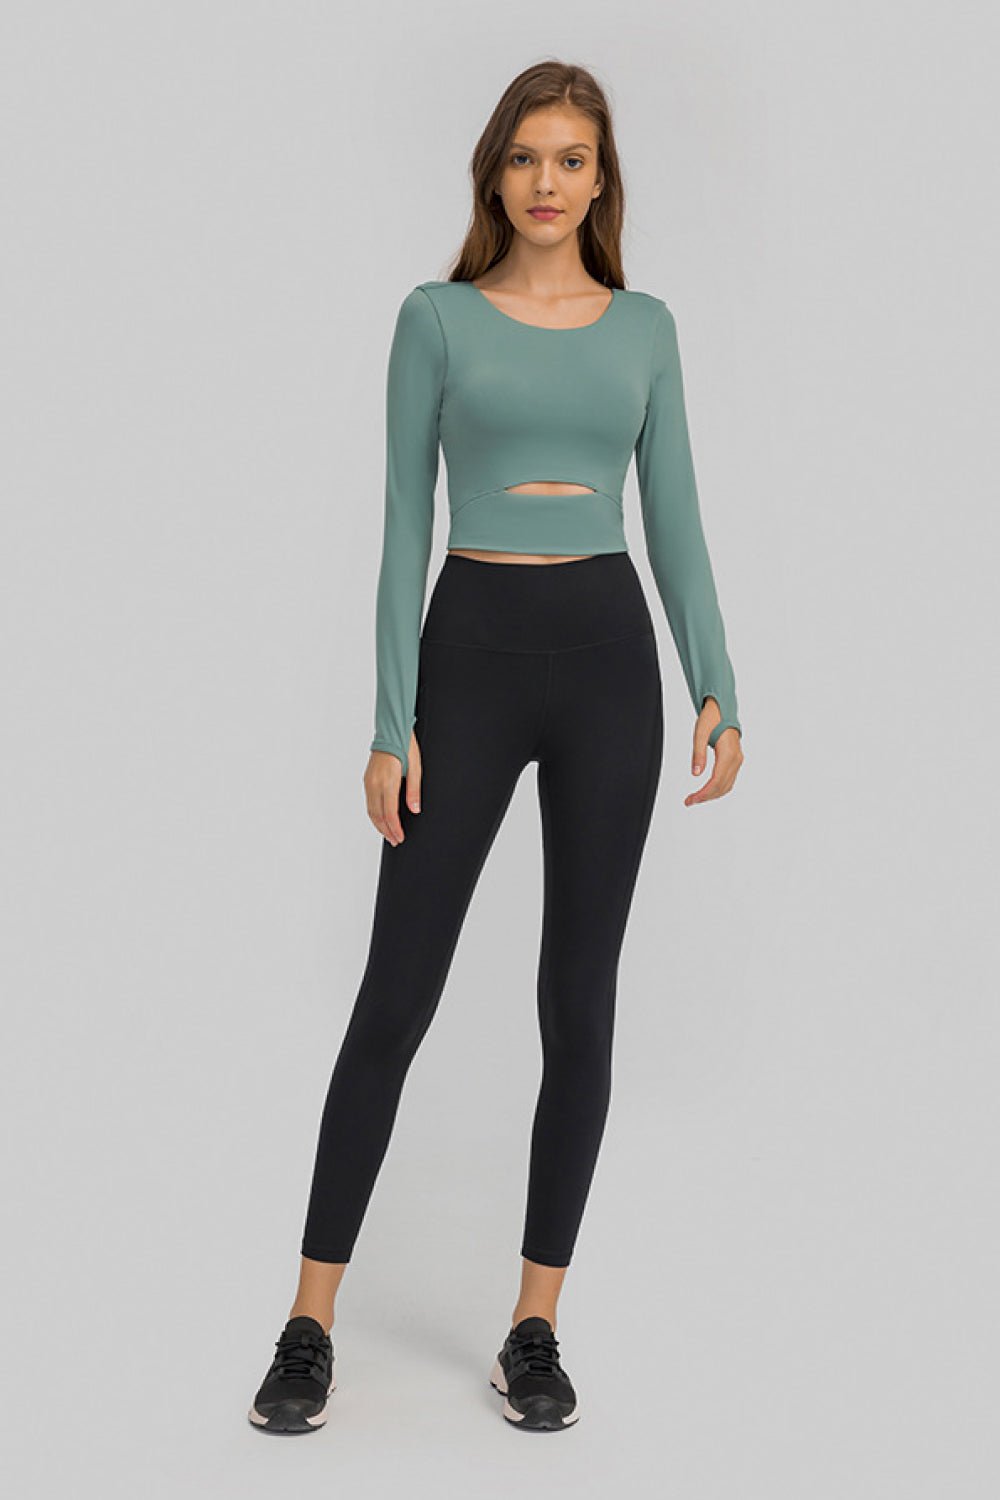 Cut Out Front Crop Yoga Tee - Mervyns